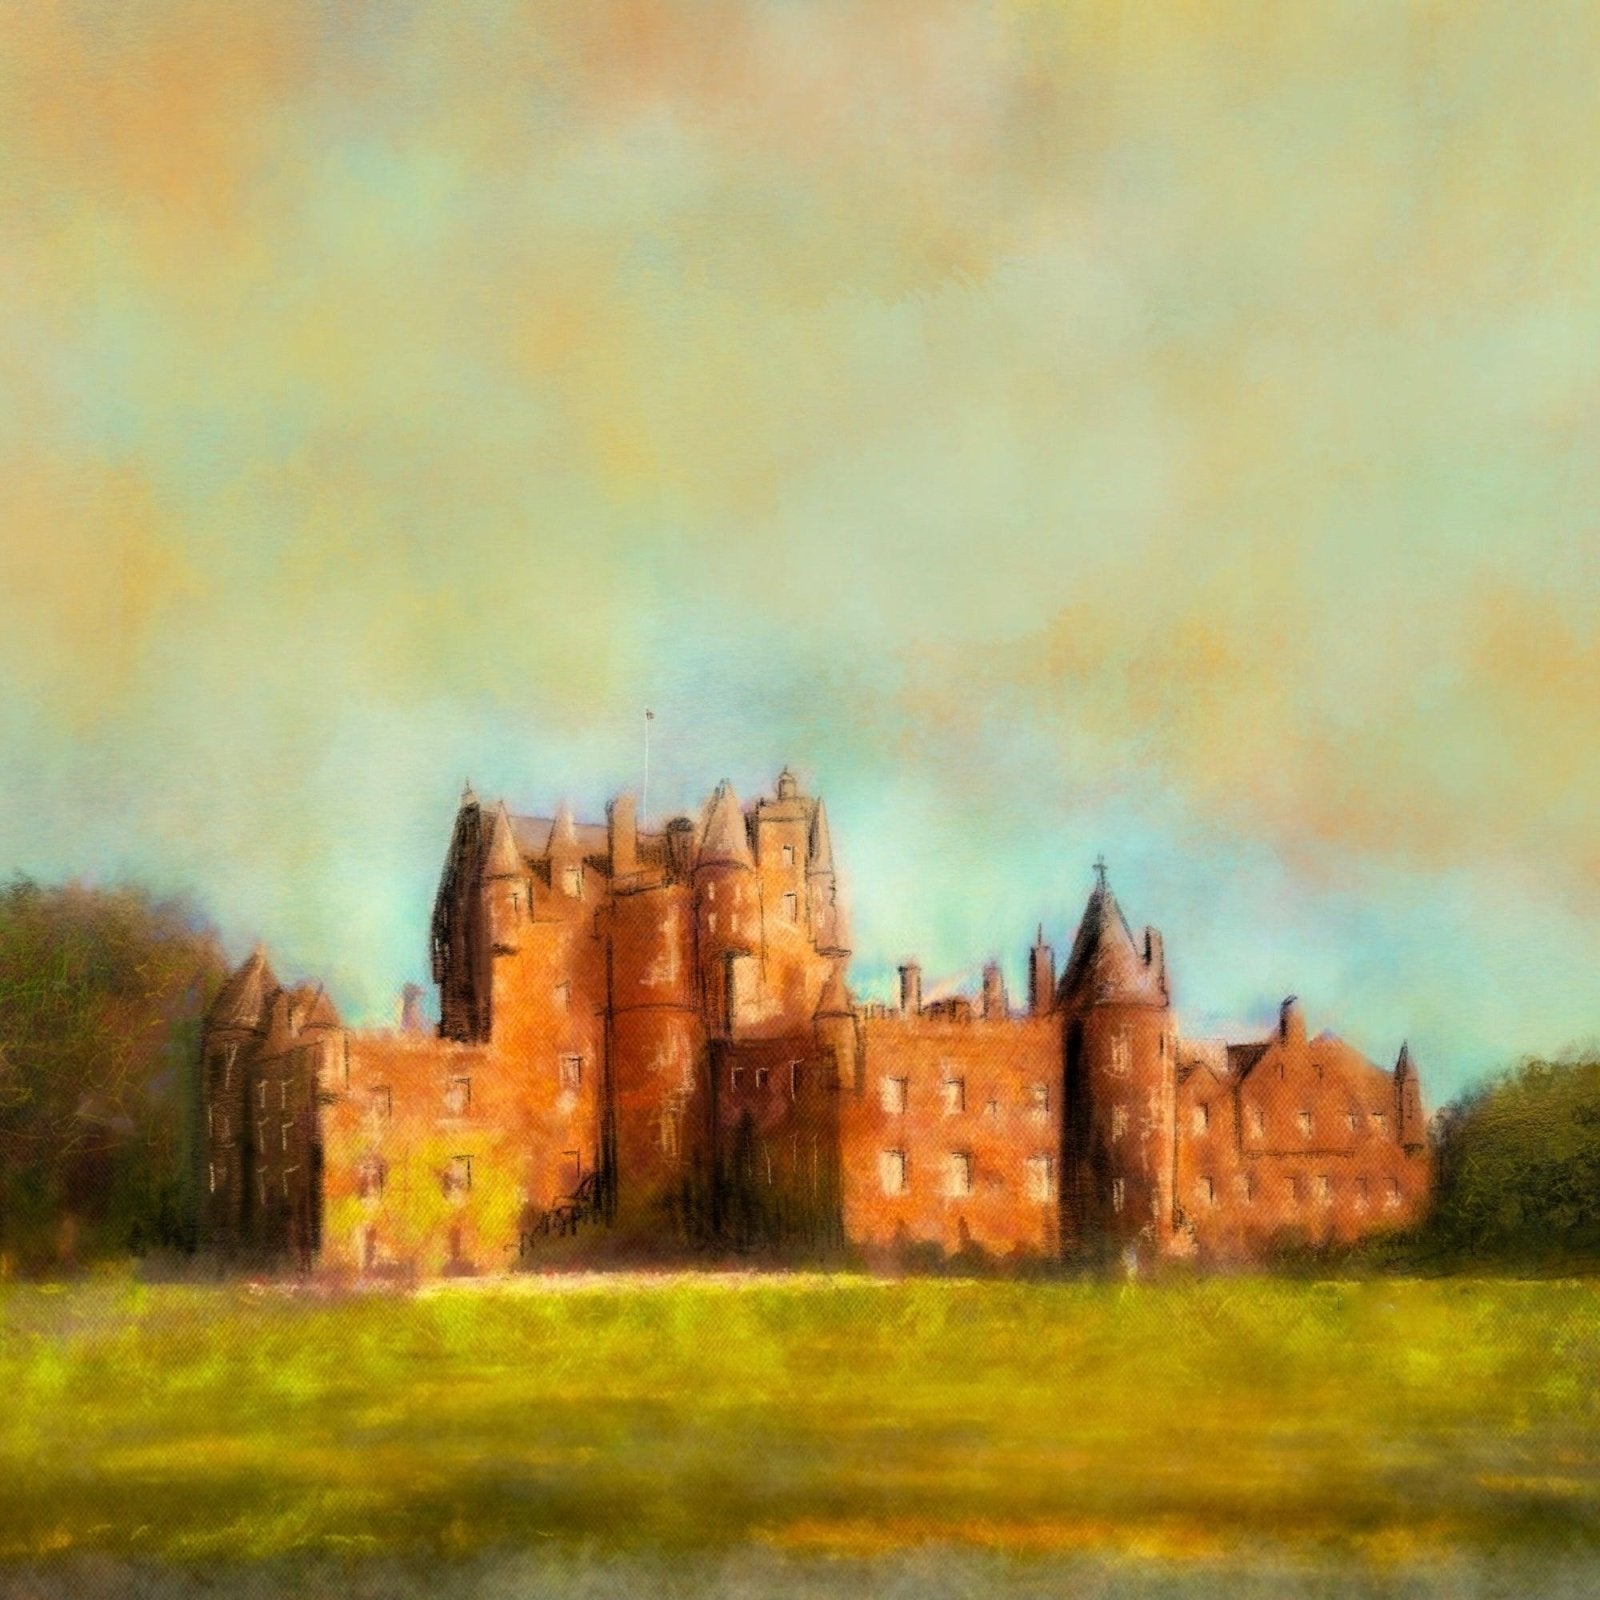 Glamis Castle Wooden Art Block-Wooden Art Blocks-Historic & Iconic Scotland Art Gallery-Paintings, Prints, Homeware, Art Gifts From Scotland By Scottish Artist Kevin Hunter